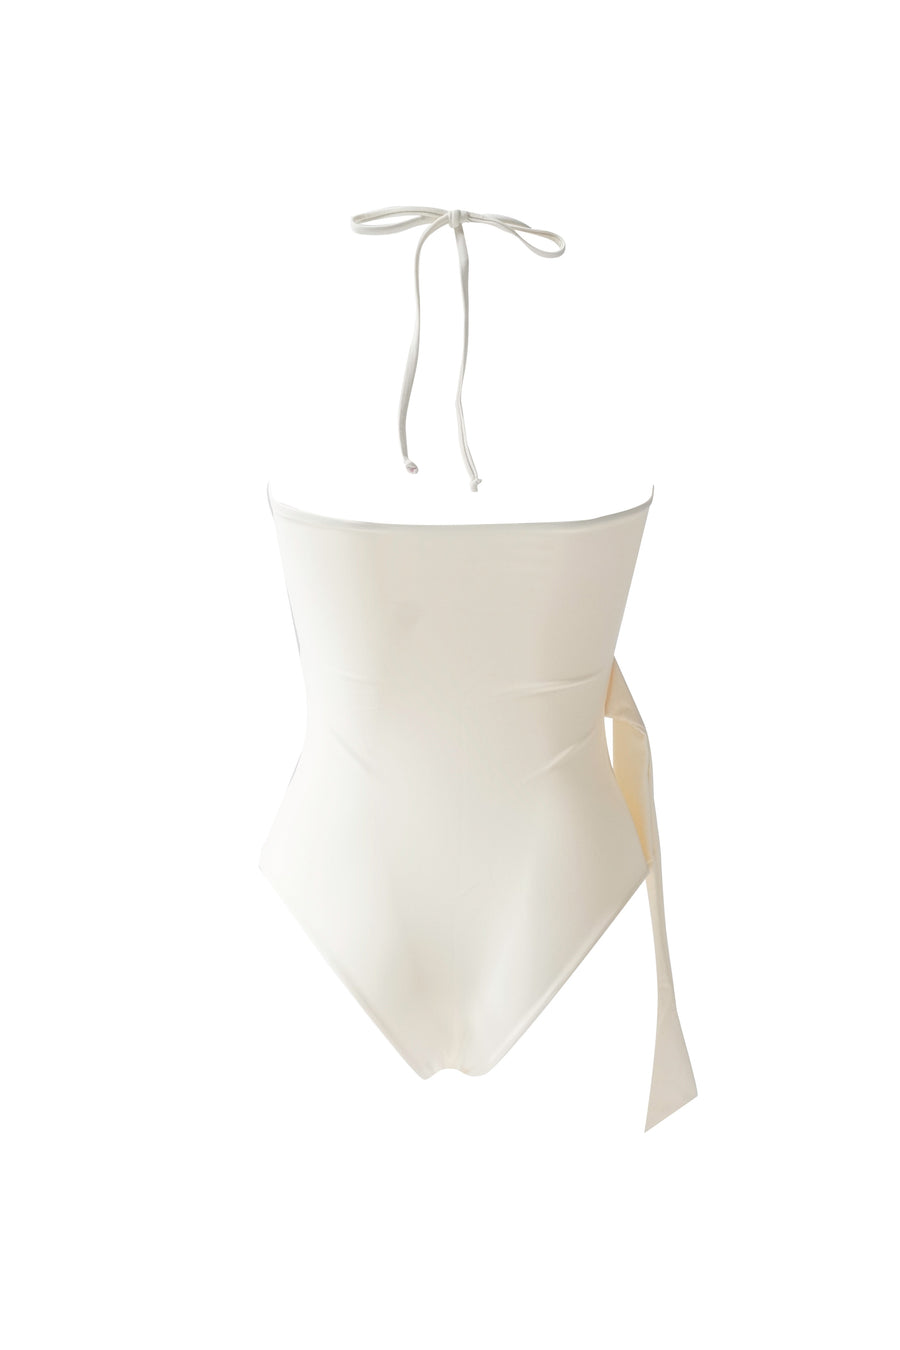 Belted Maillot - Cream